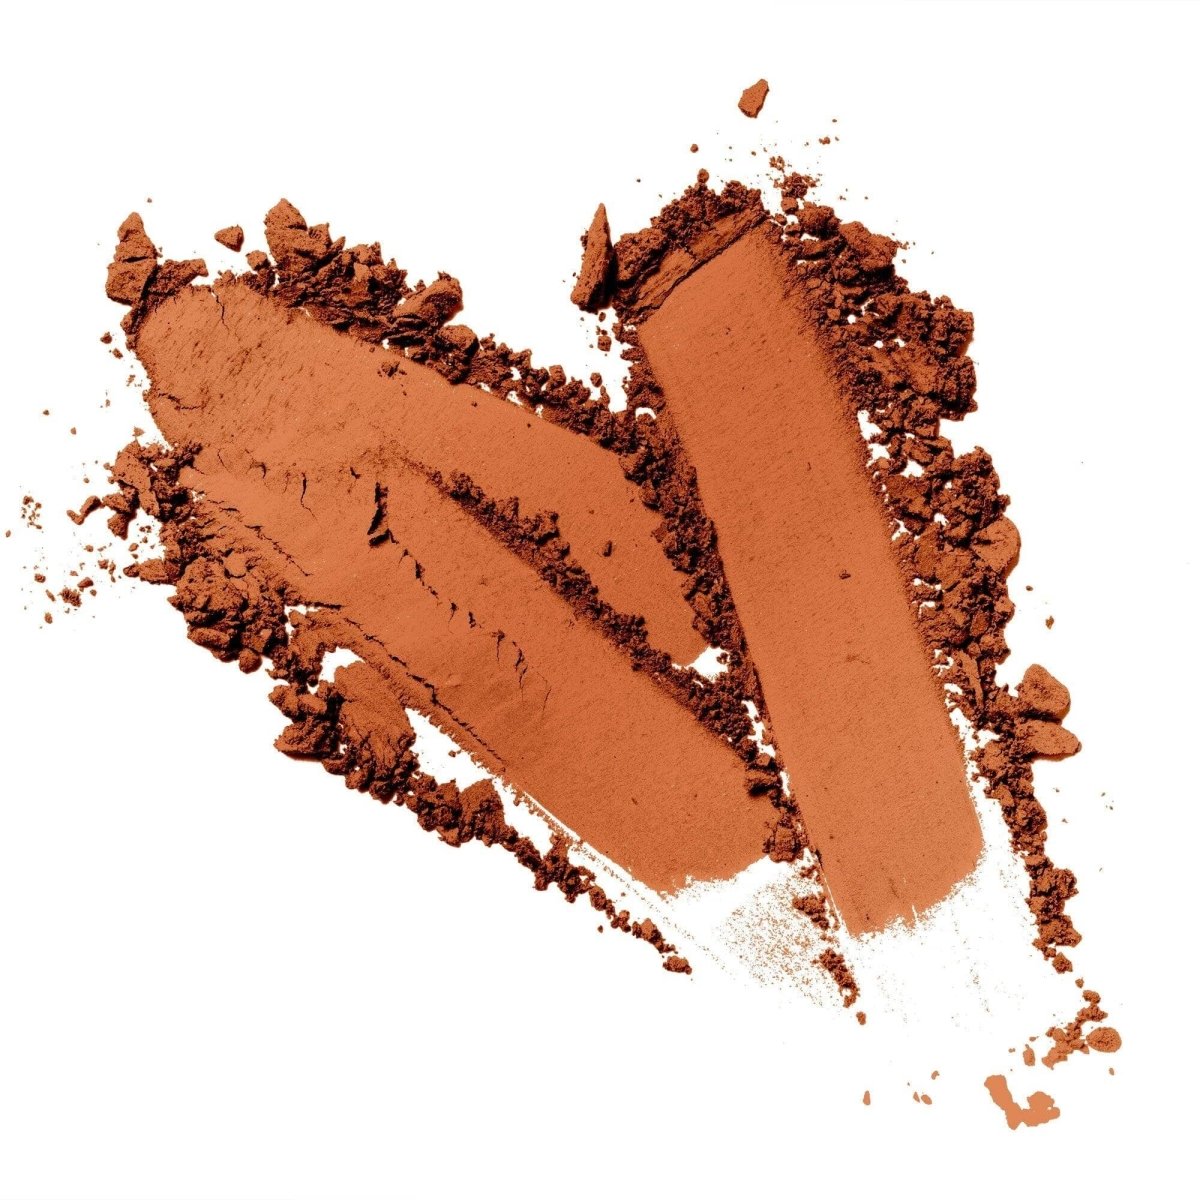 A heart-shaped swatch of earthy brown cruelty-free eyeshadow on a white background